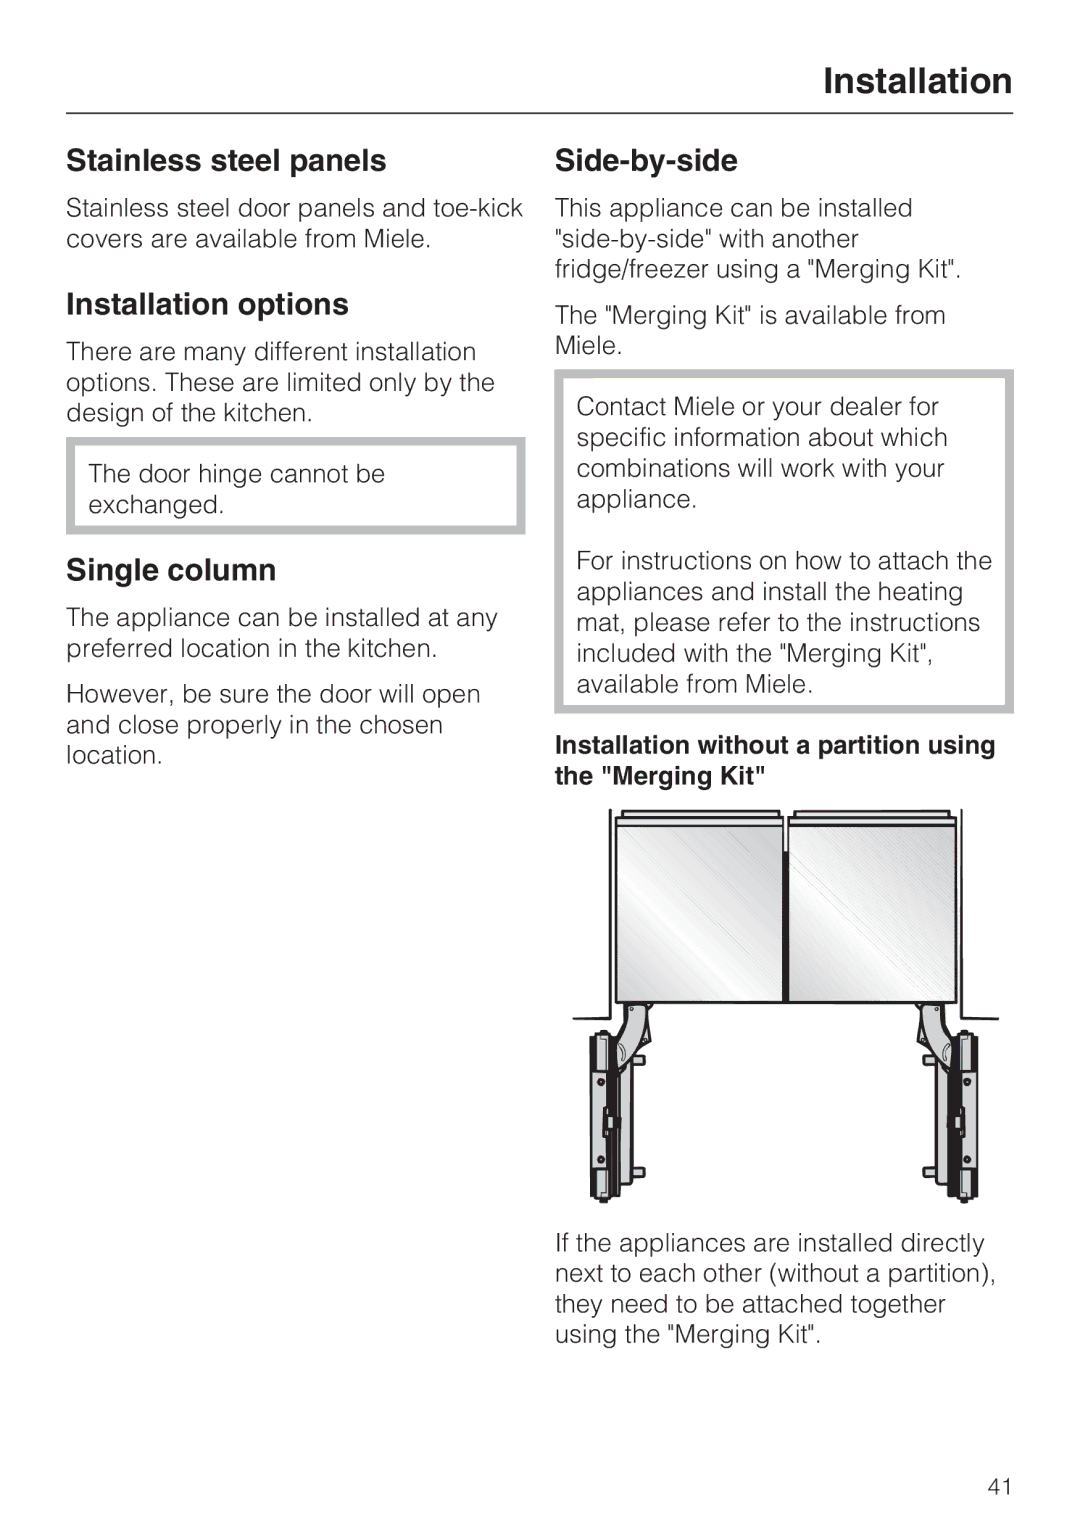 Miele M.-Nr. 09 920 730 installation instructions Stainless steel panels, Installation options, Single column, Side-by-side 